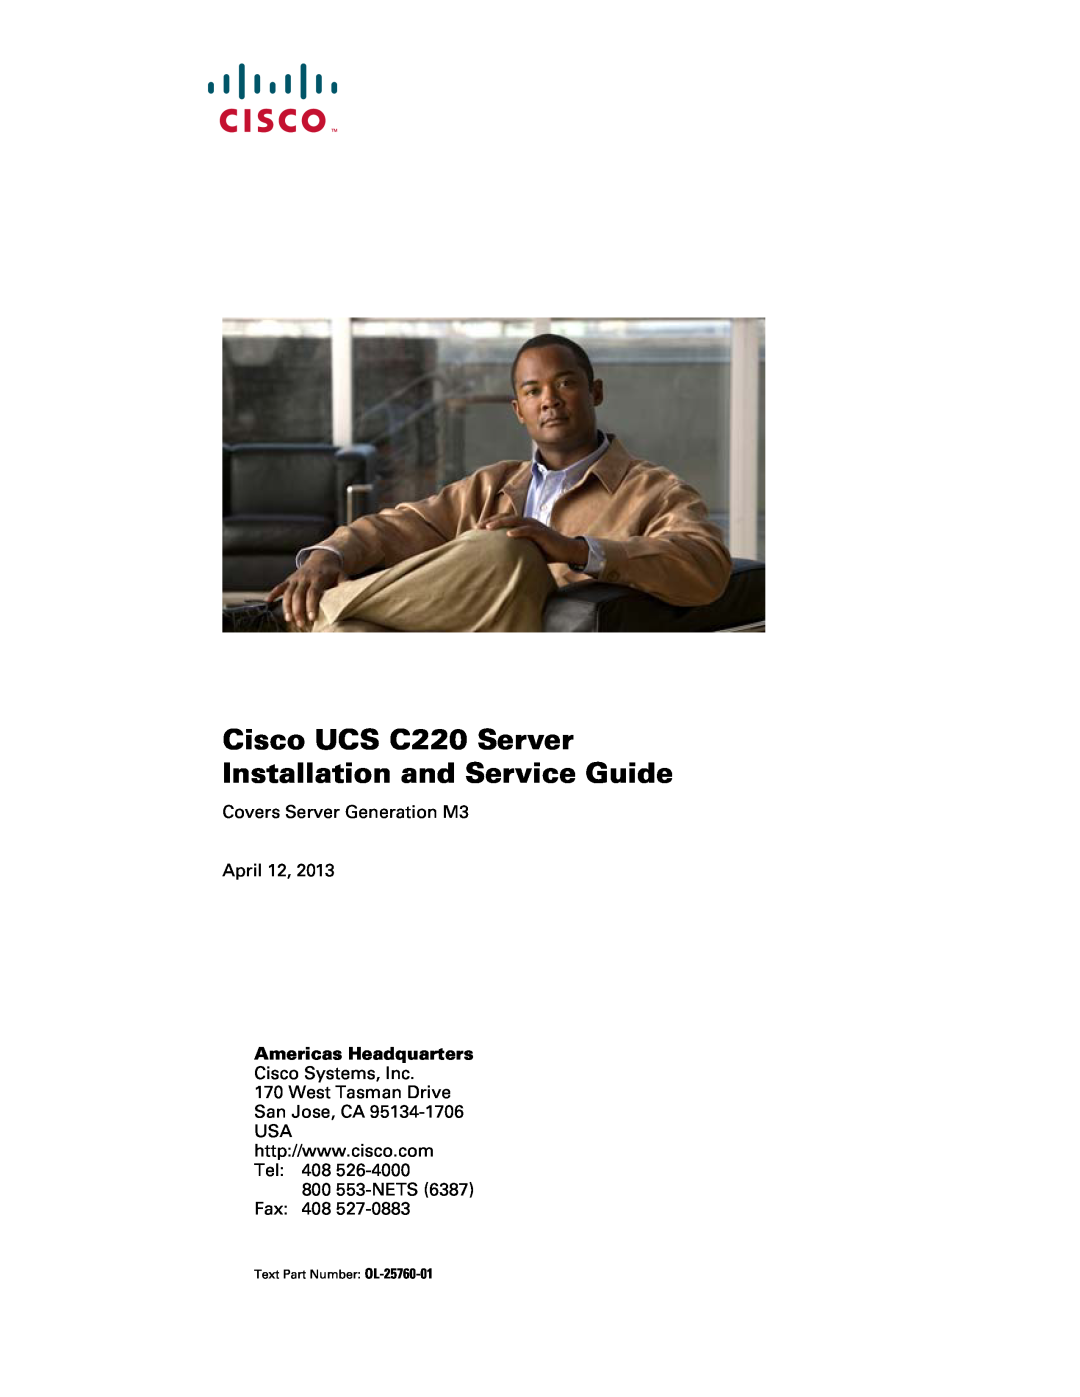 Cisco Systems UCSSP6C220E manual Covers Server Generation M3 April 12, 800 553-NETS Fax 408, Text Part Number OL-25760-01 